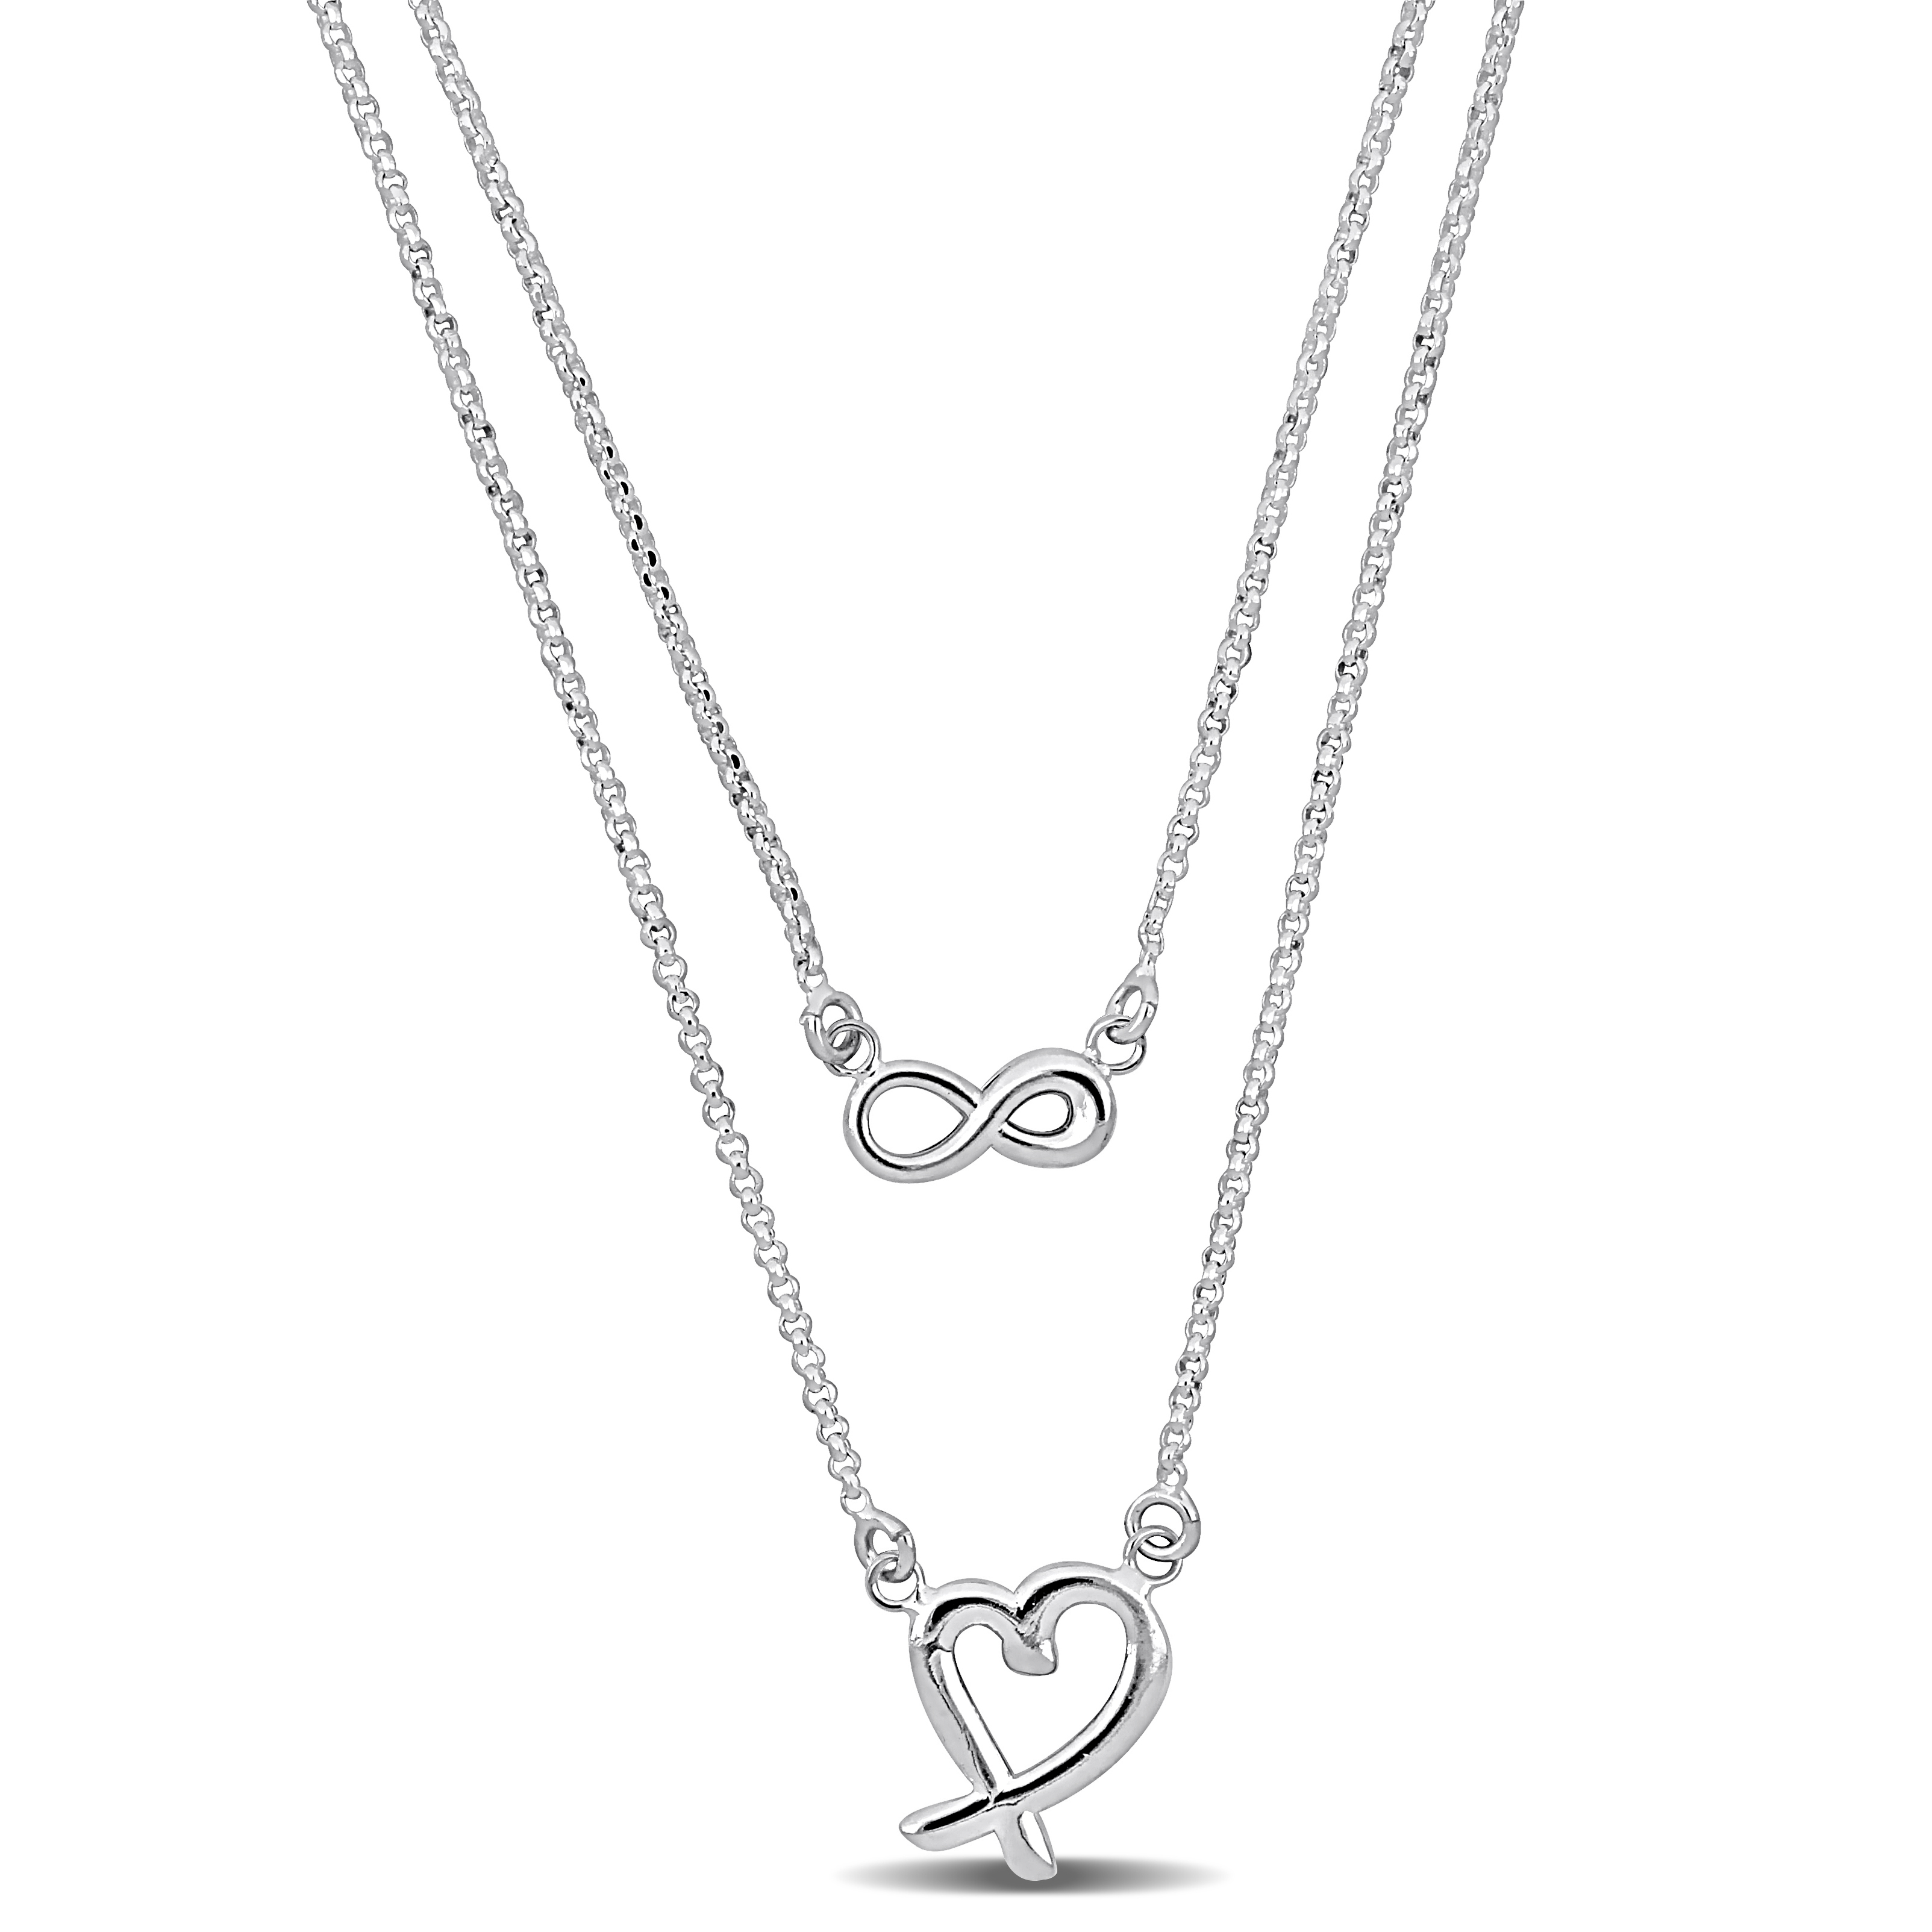 Infinity and Heart Charm Double Strand Necklace in Sterling Silver - 16+18+1 in.